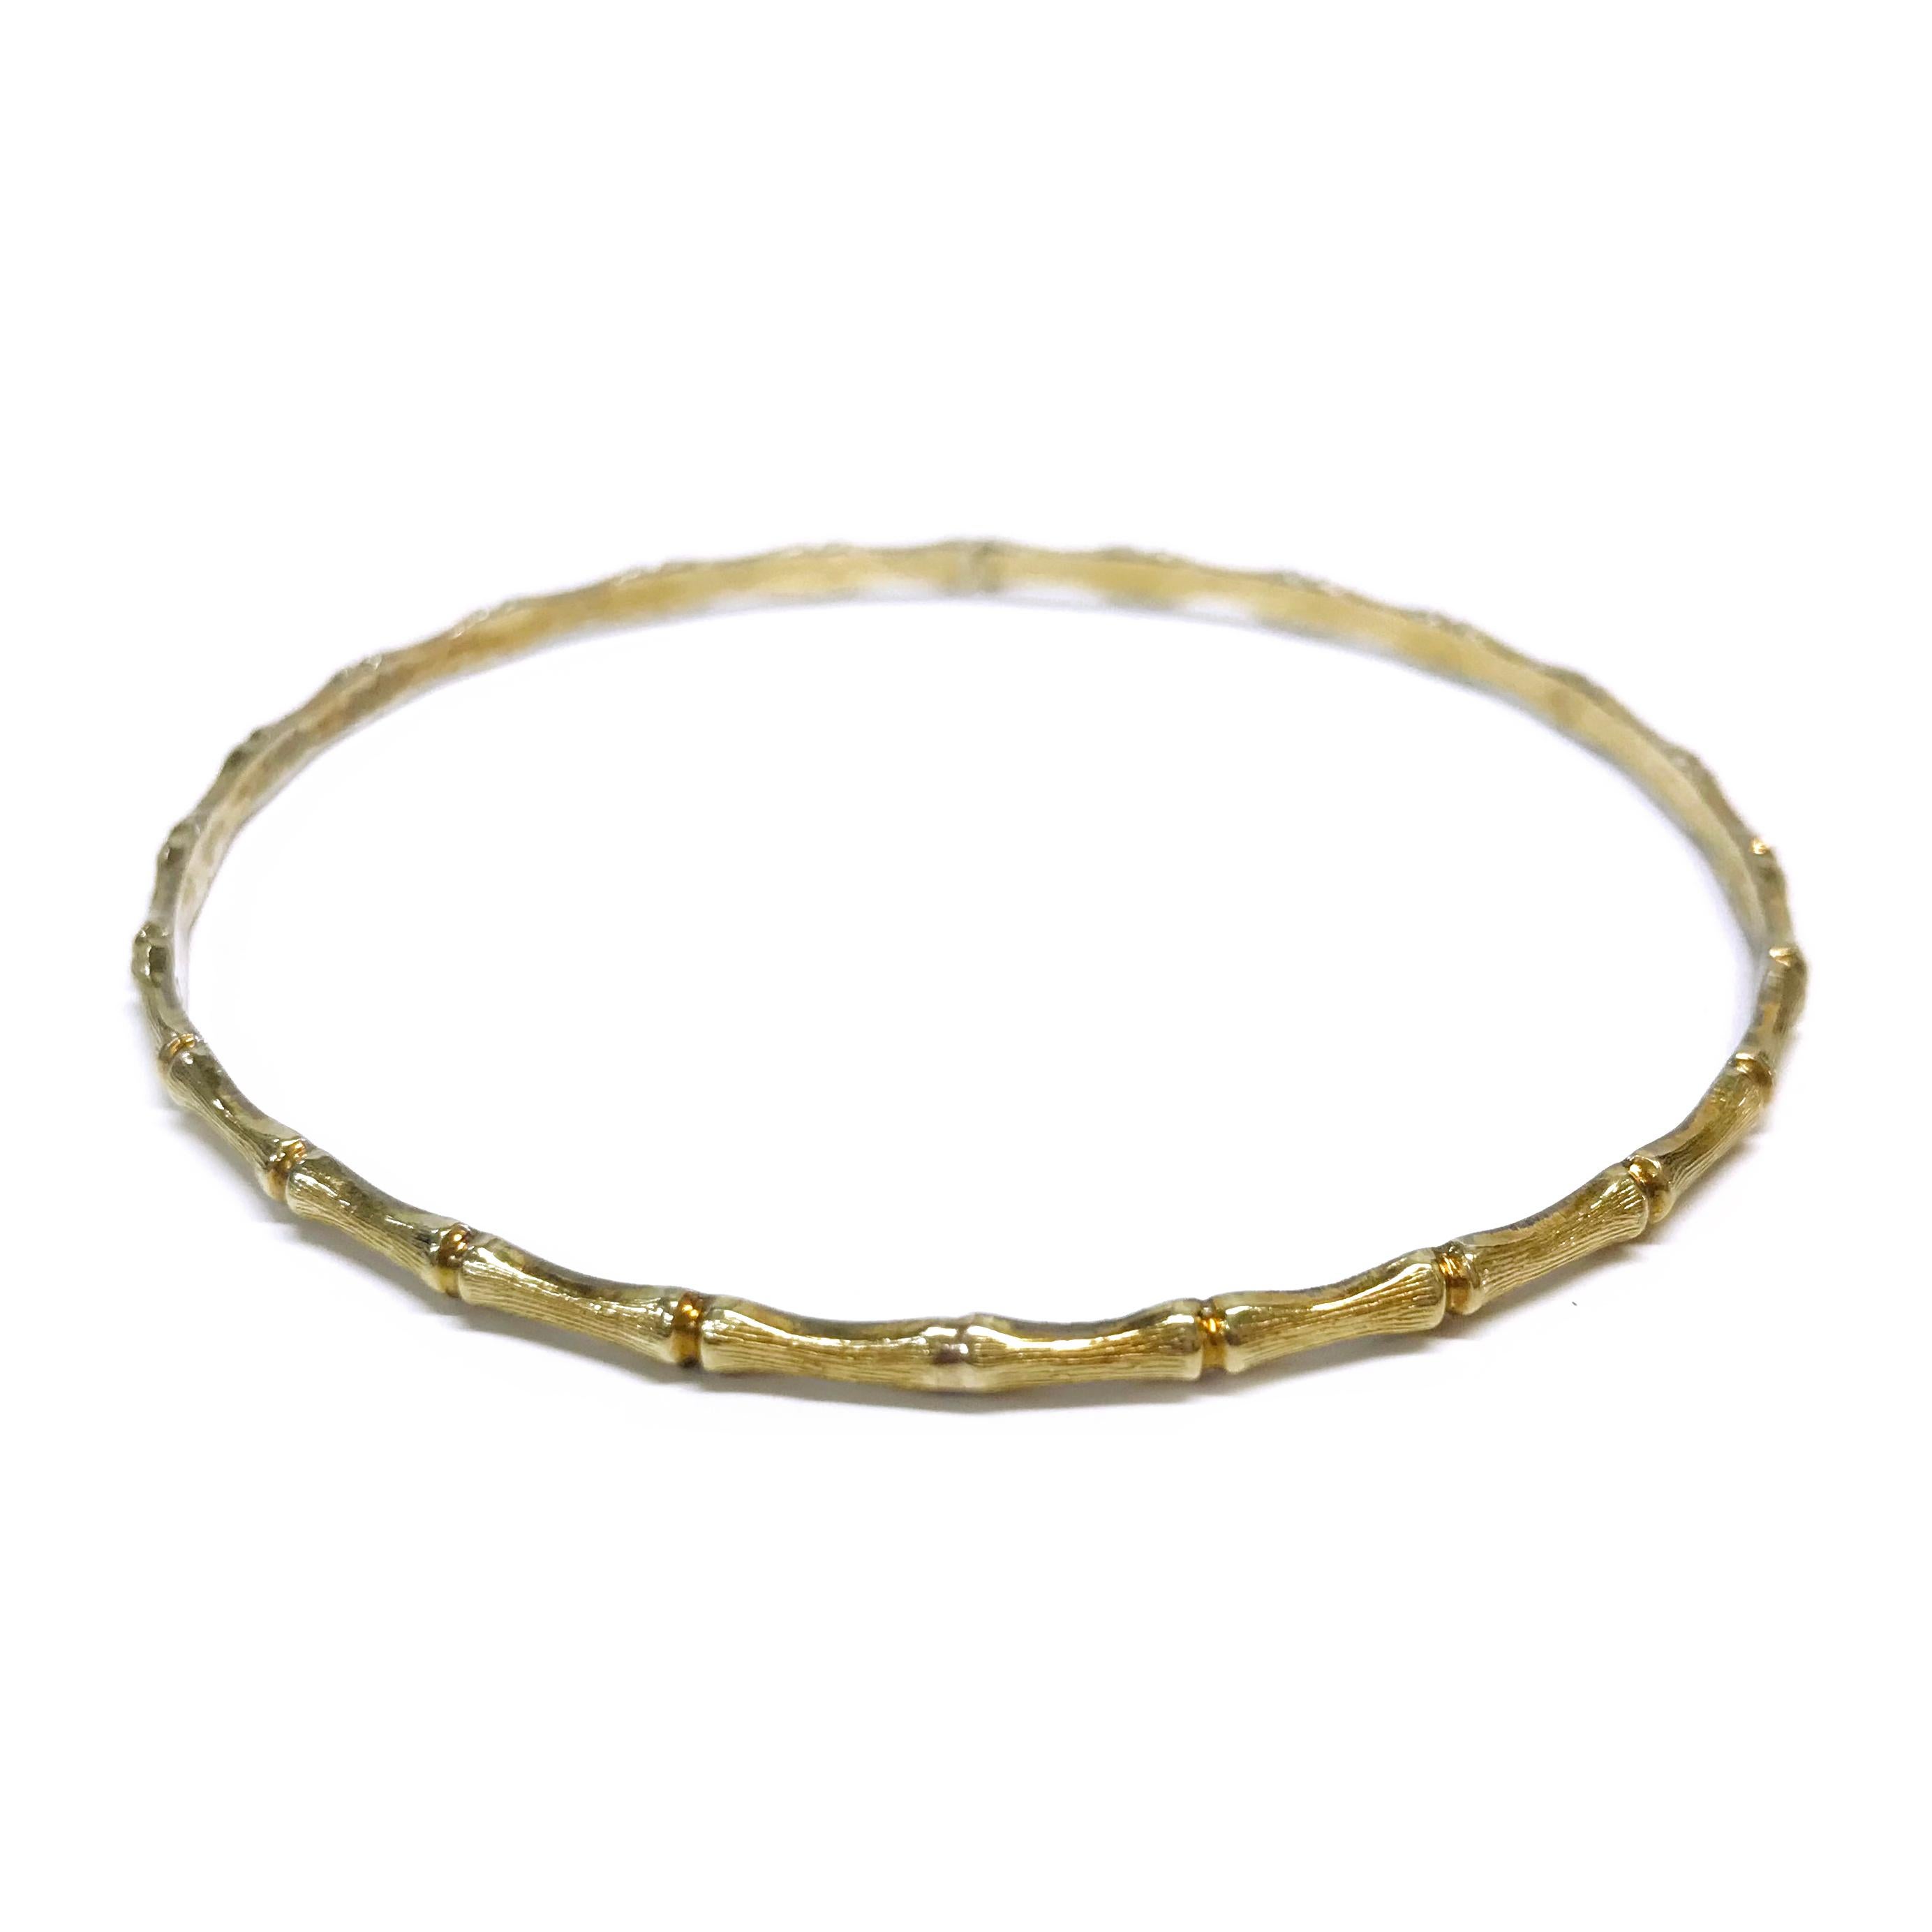 14 Karat Yellow Gold Bamboo Bangle. The bangle consists of textured bamboo sections on the exterior of the bangle and a smooth flat surface on the interior of the bangle. The bangle measures 1mm x 2.75mm with a 7.5